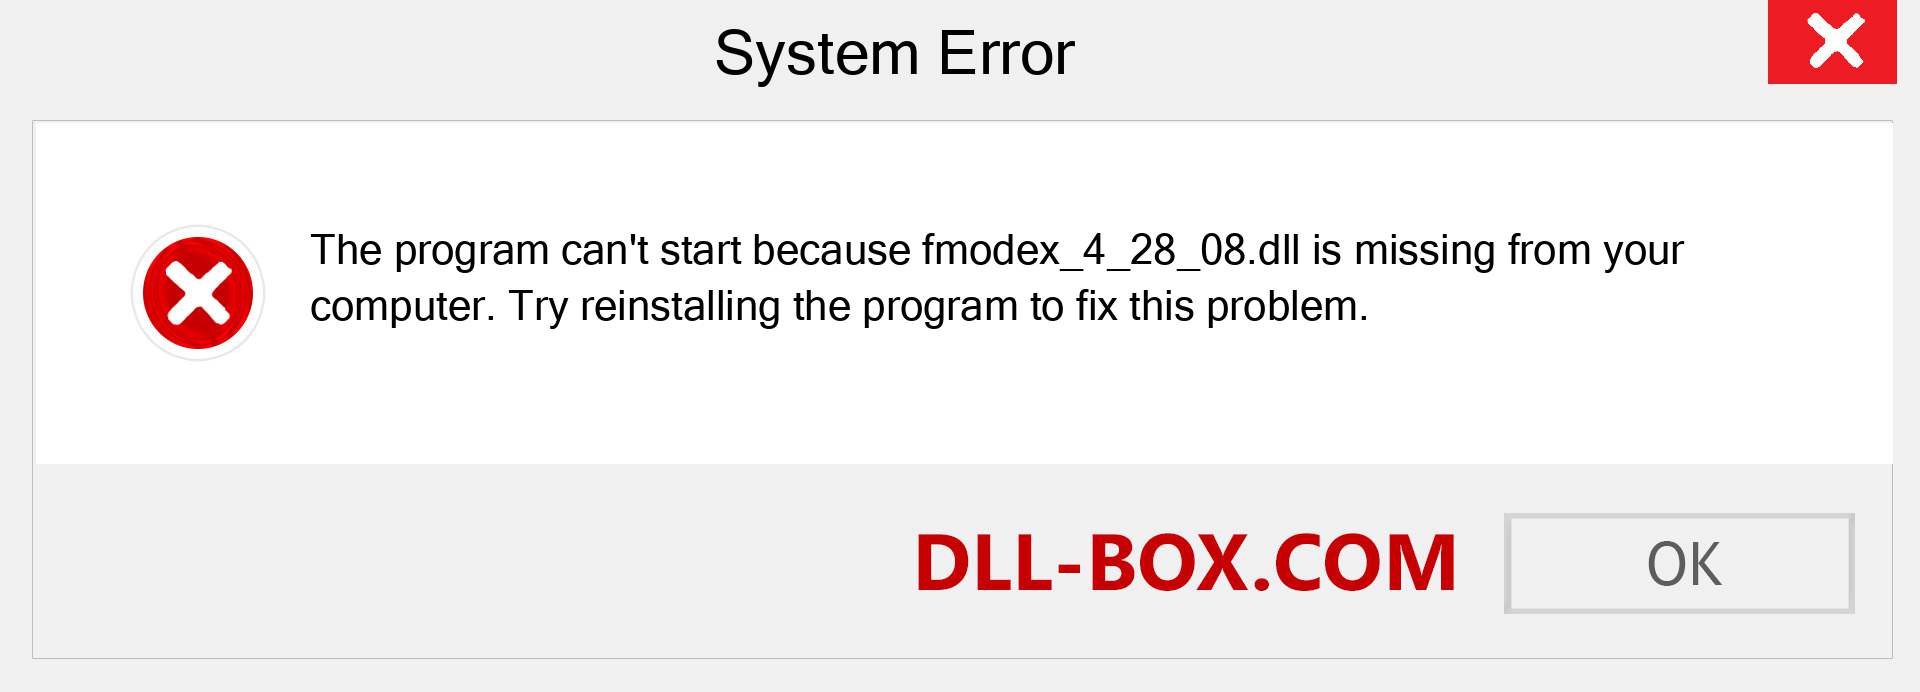  fmodex_4_28_08.dll file is missing?. Download for Windows 7, 8, 10 - Fix  fmodex_4_28_08 dll Missing Error on Windows, photos, images